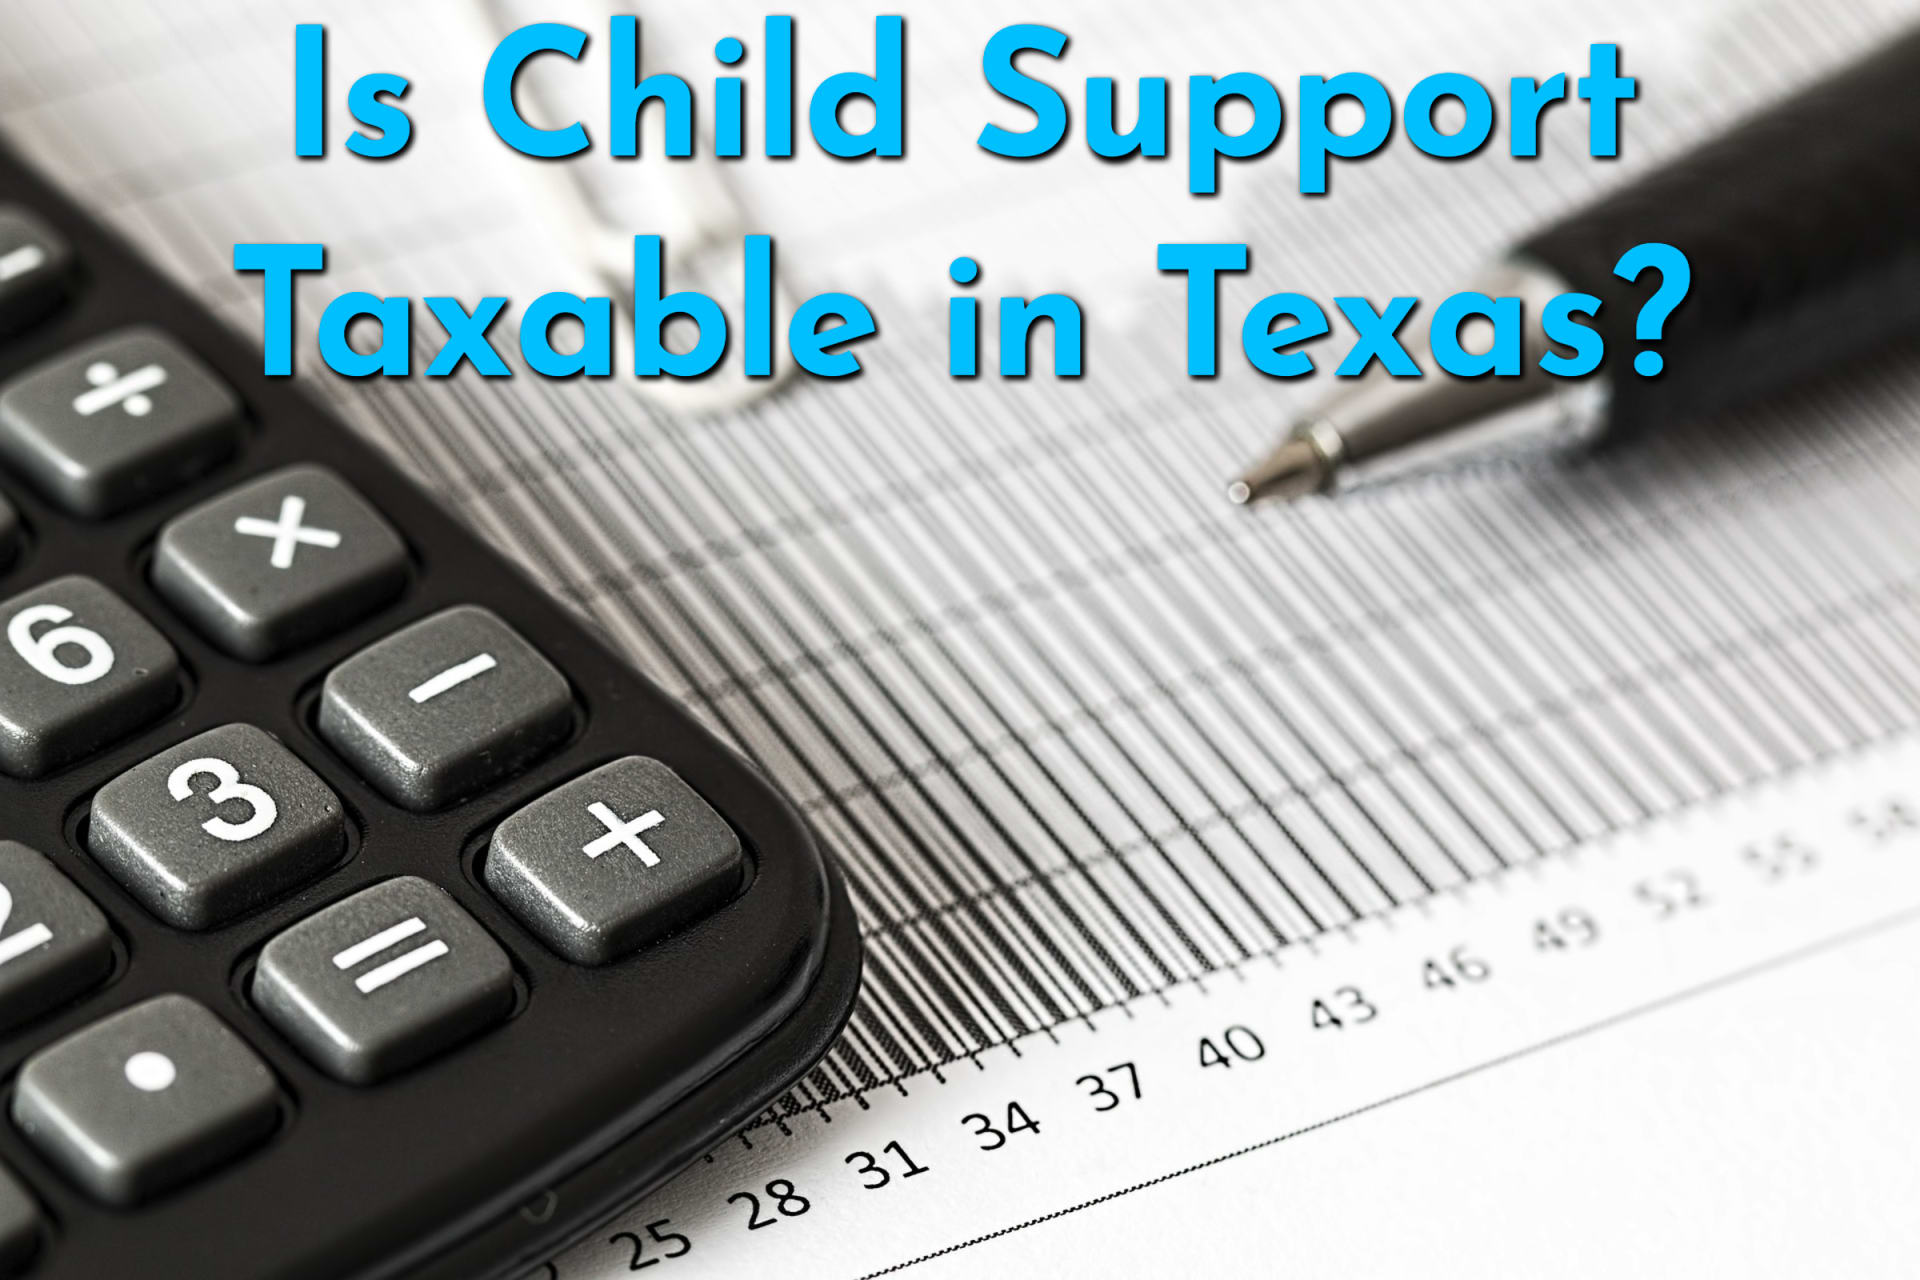 Is Child Support Taxable in Texas?